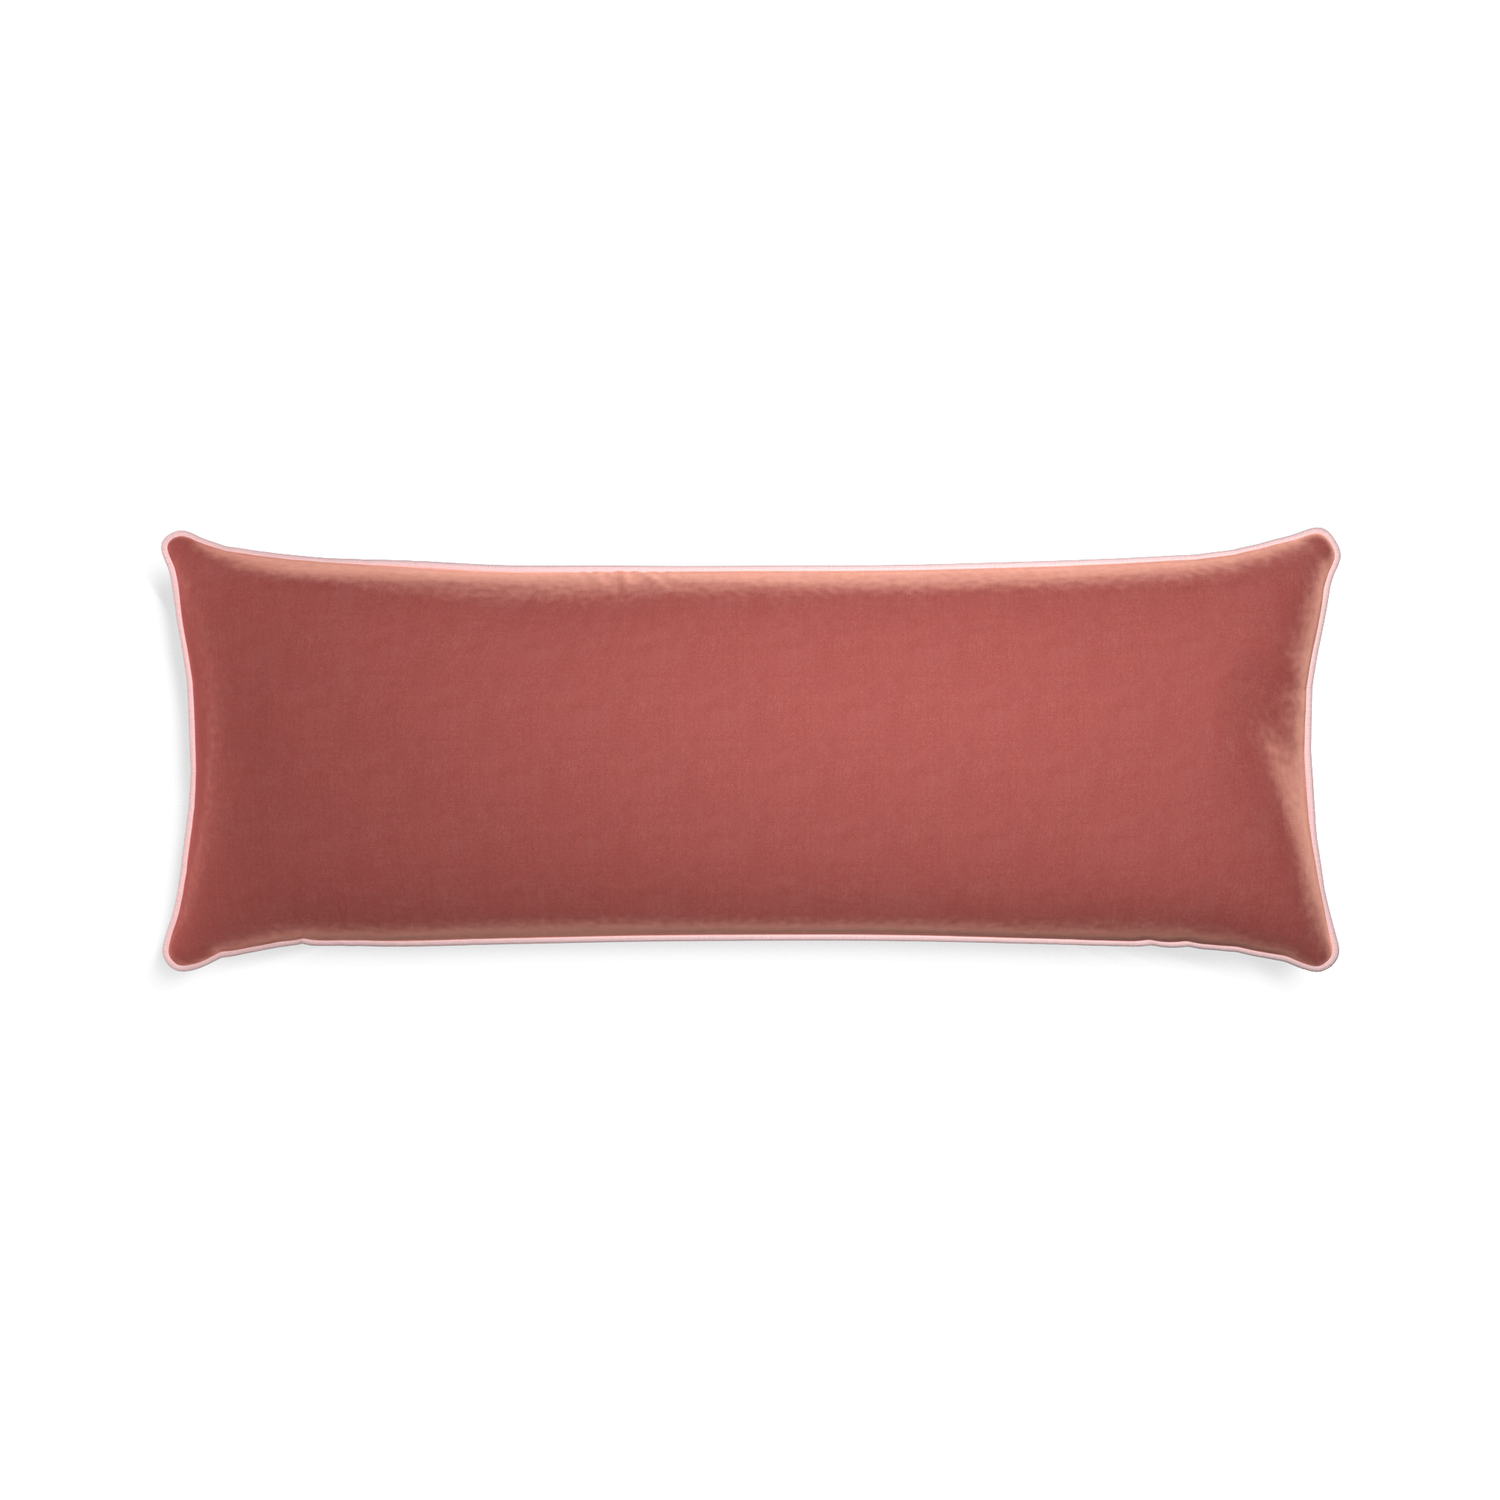 Xl-lumbar cosmo velvet custom coralpillow with petal piping on white background